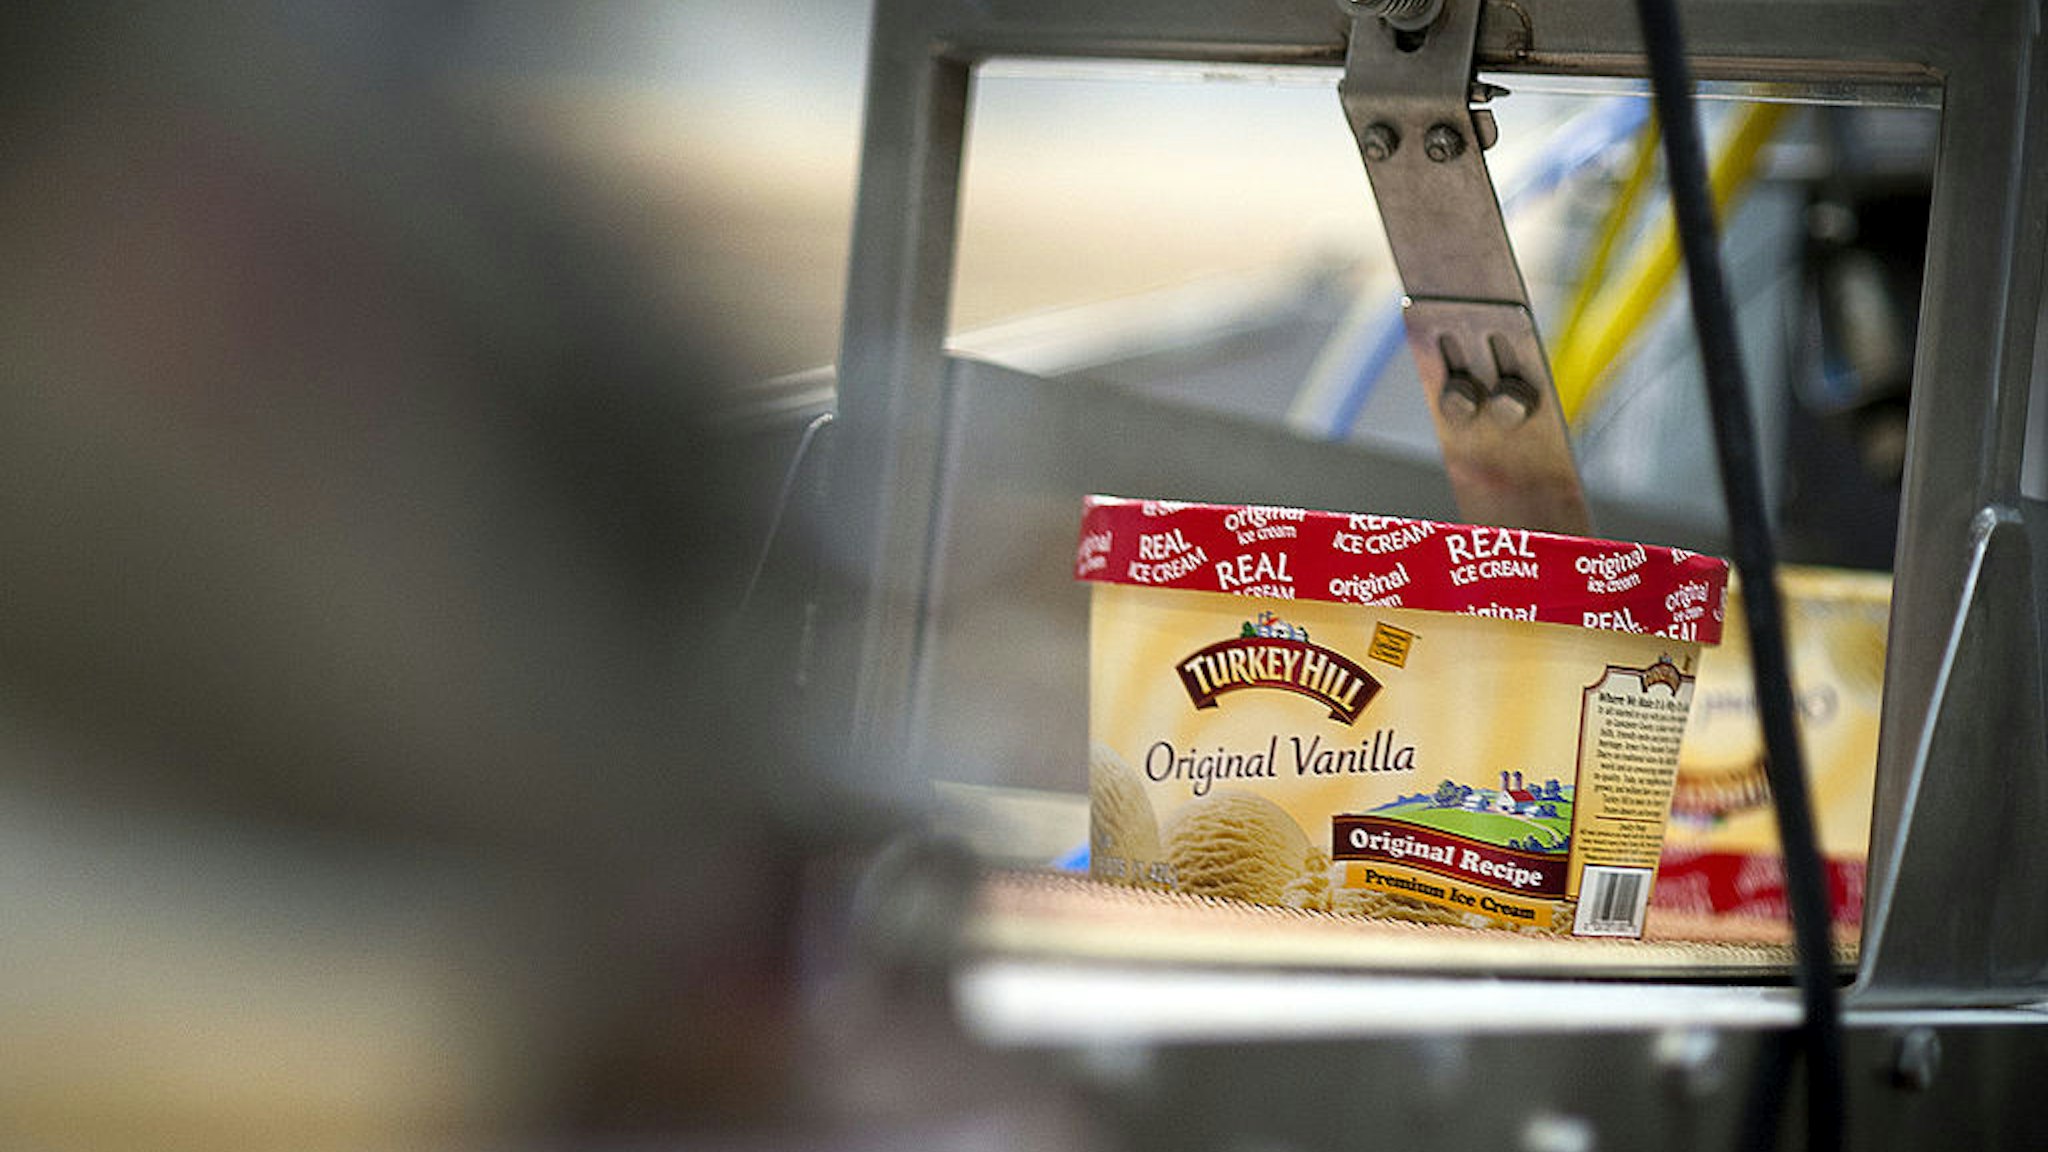 Packages of vanilla ice cream move along a conveyer belt at Turkey Hill LP's production facility in Contestoga, Pennsylvania, U.S., on Monday, Nov. 21, 2011.